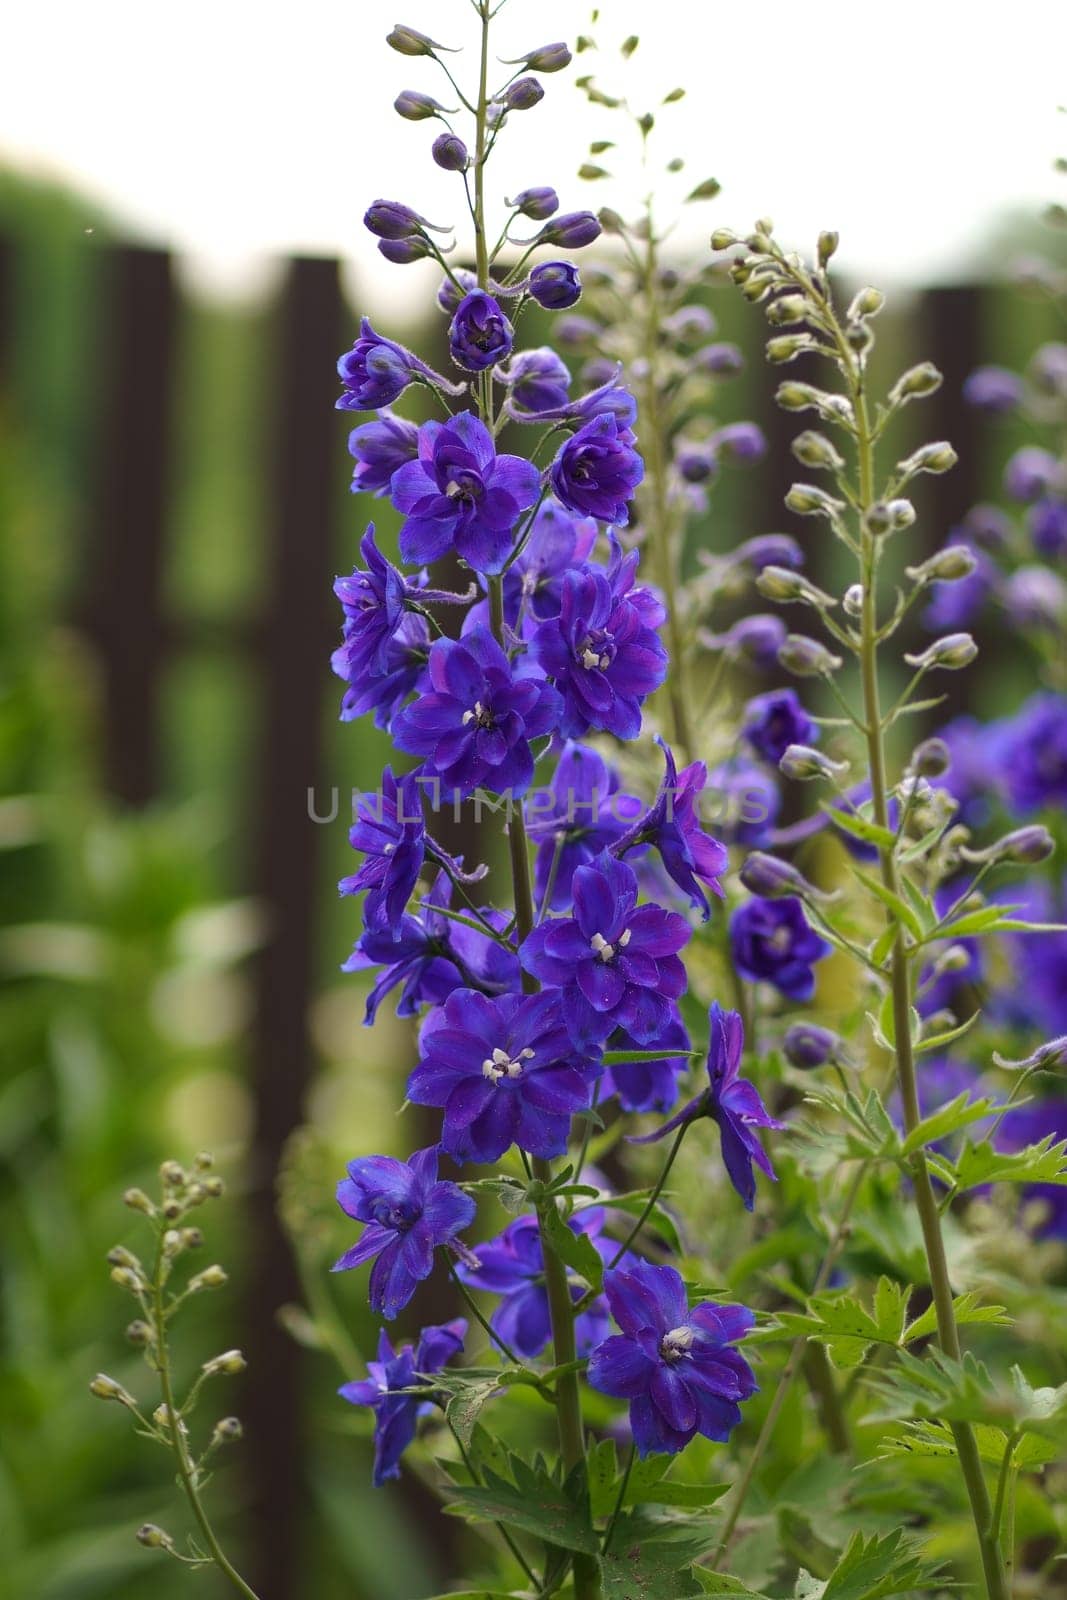 blooming delphinium. Blue flower is the delphinium in the garden on a natural background